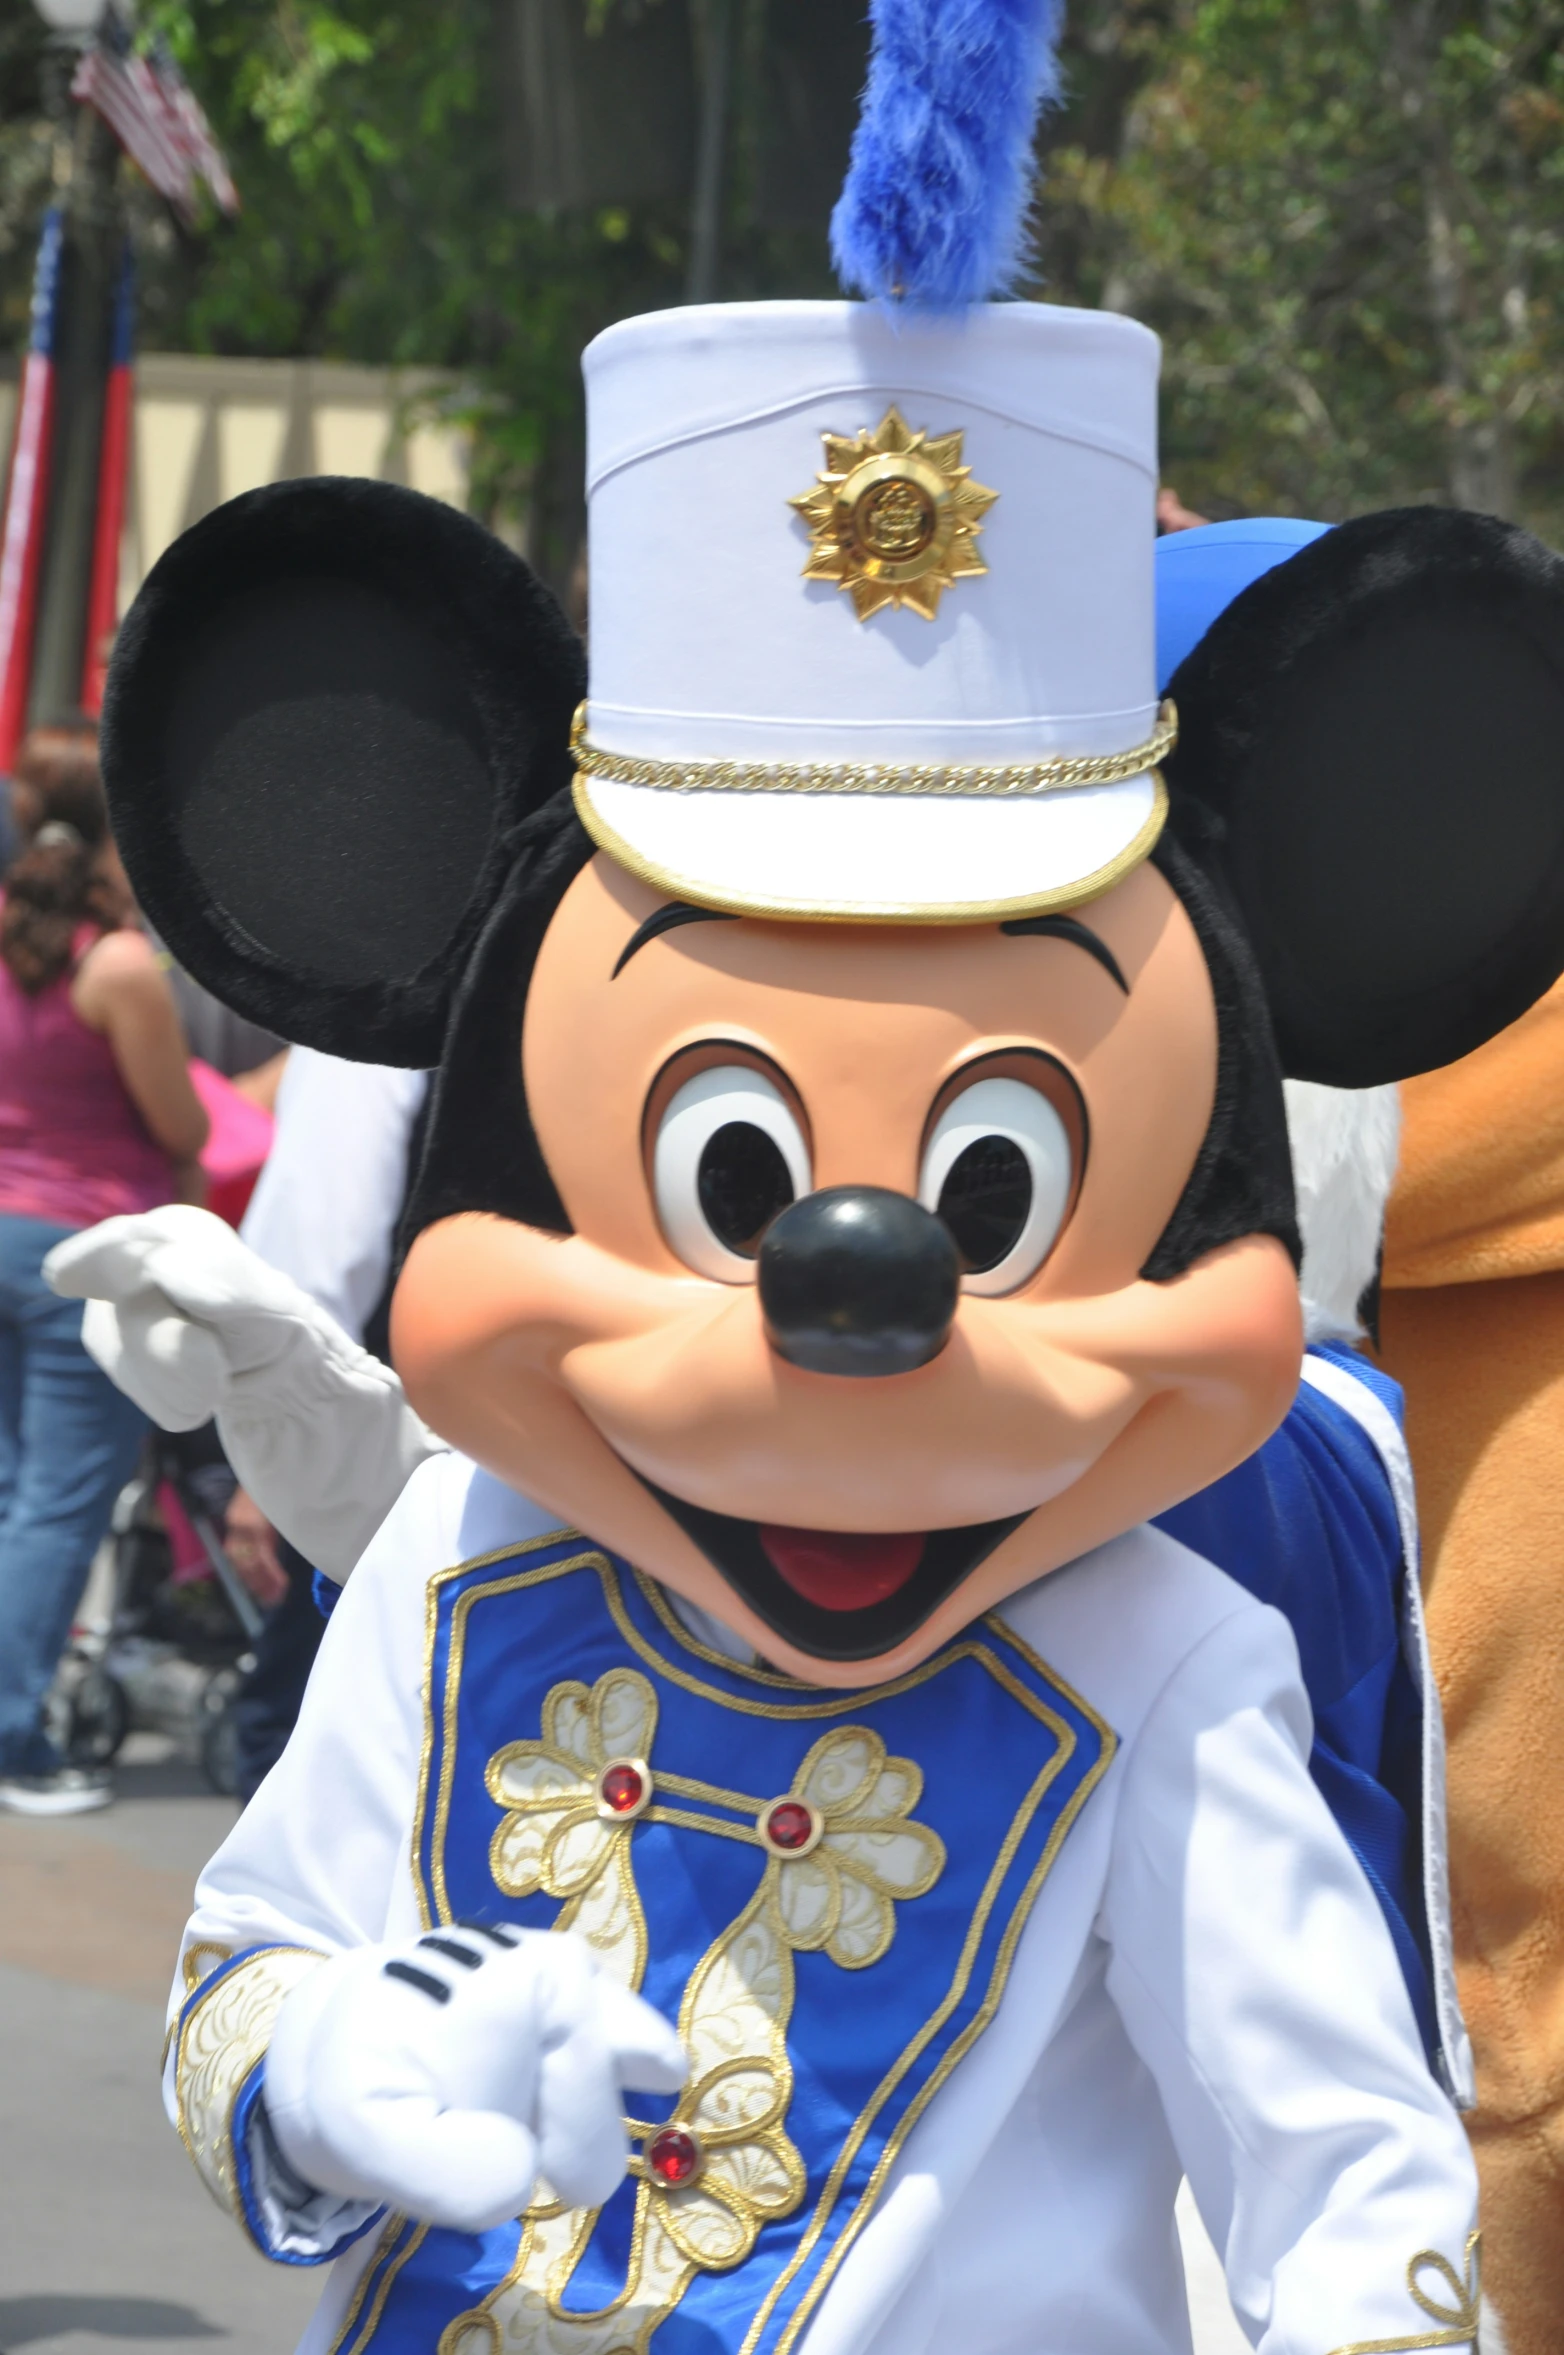 a goofy mouse mascot with a blue and gold uniform on